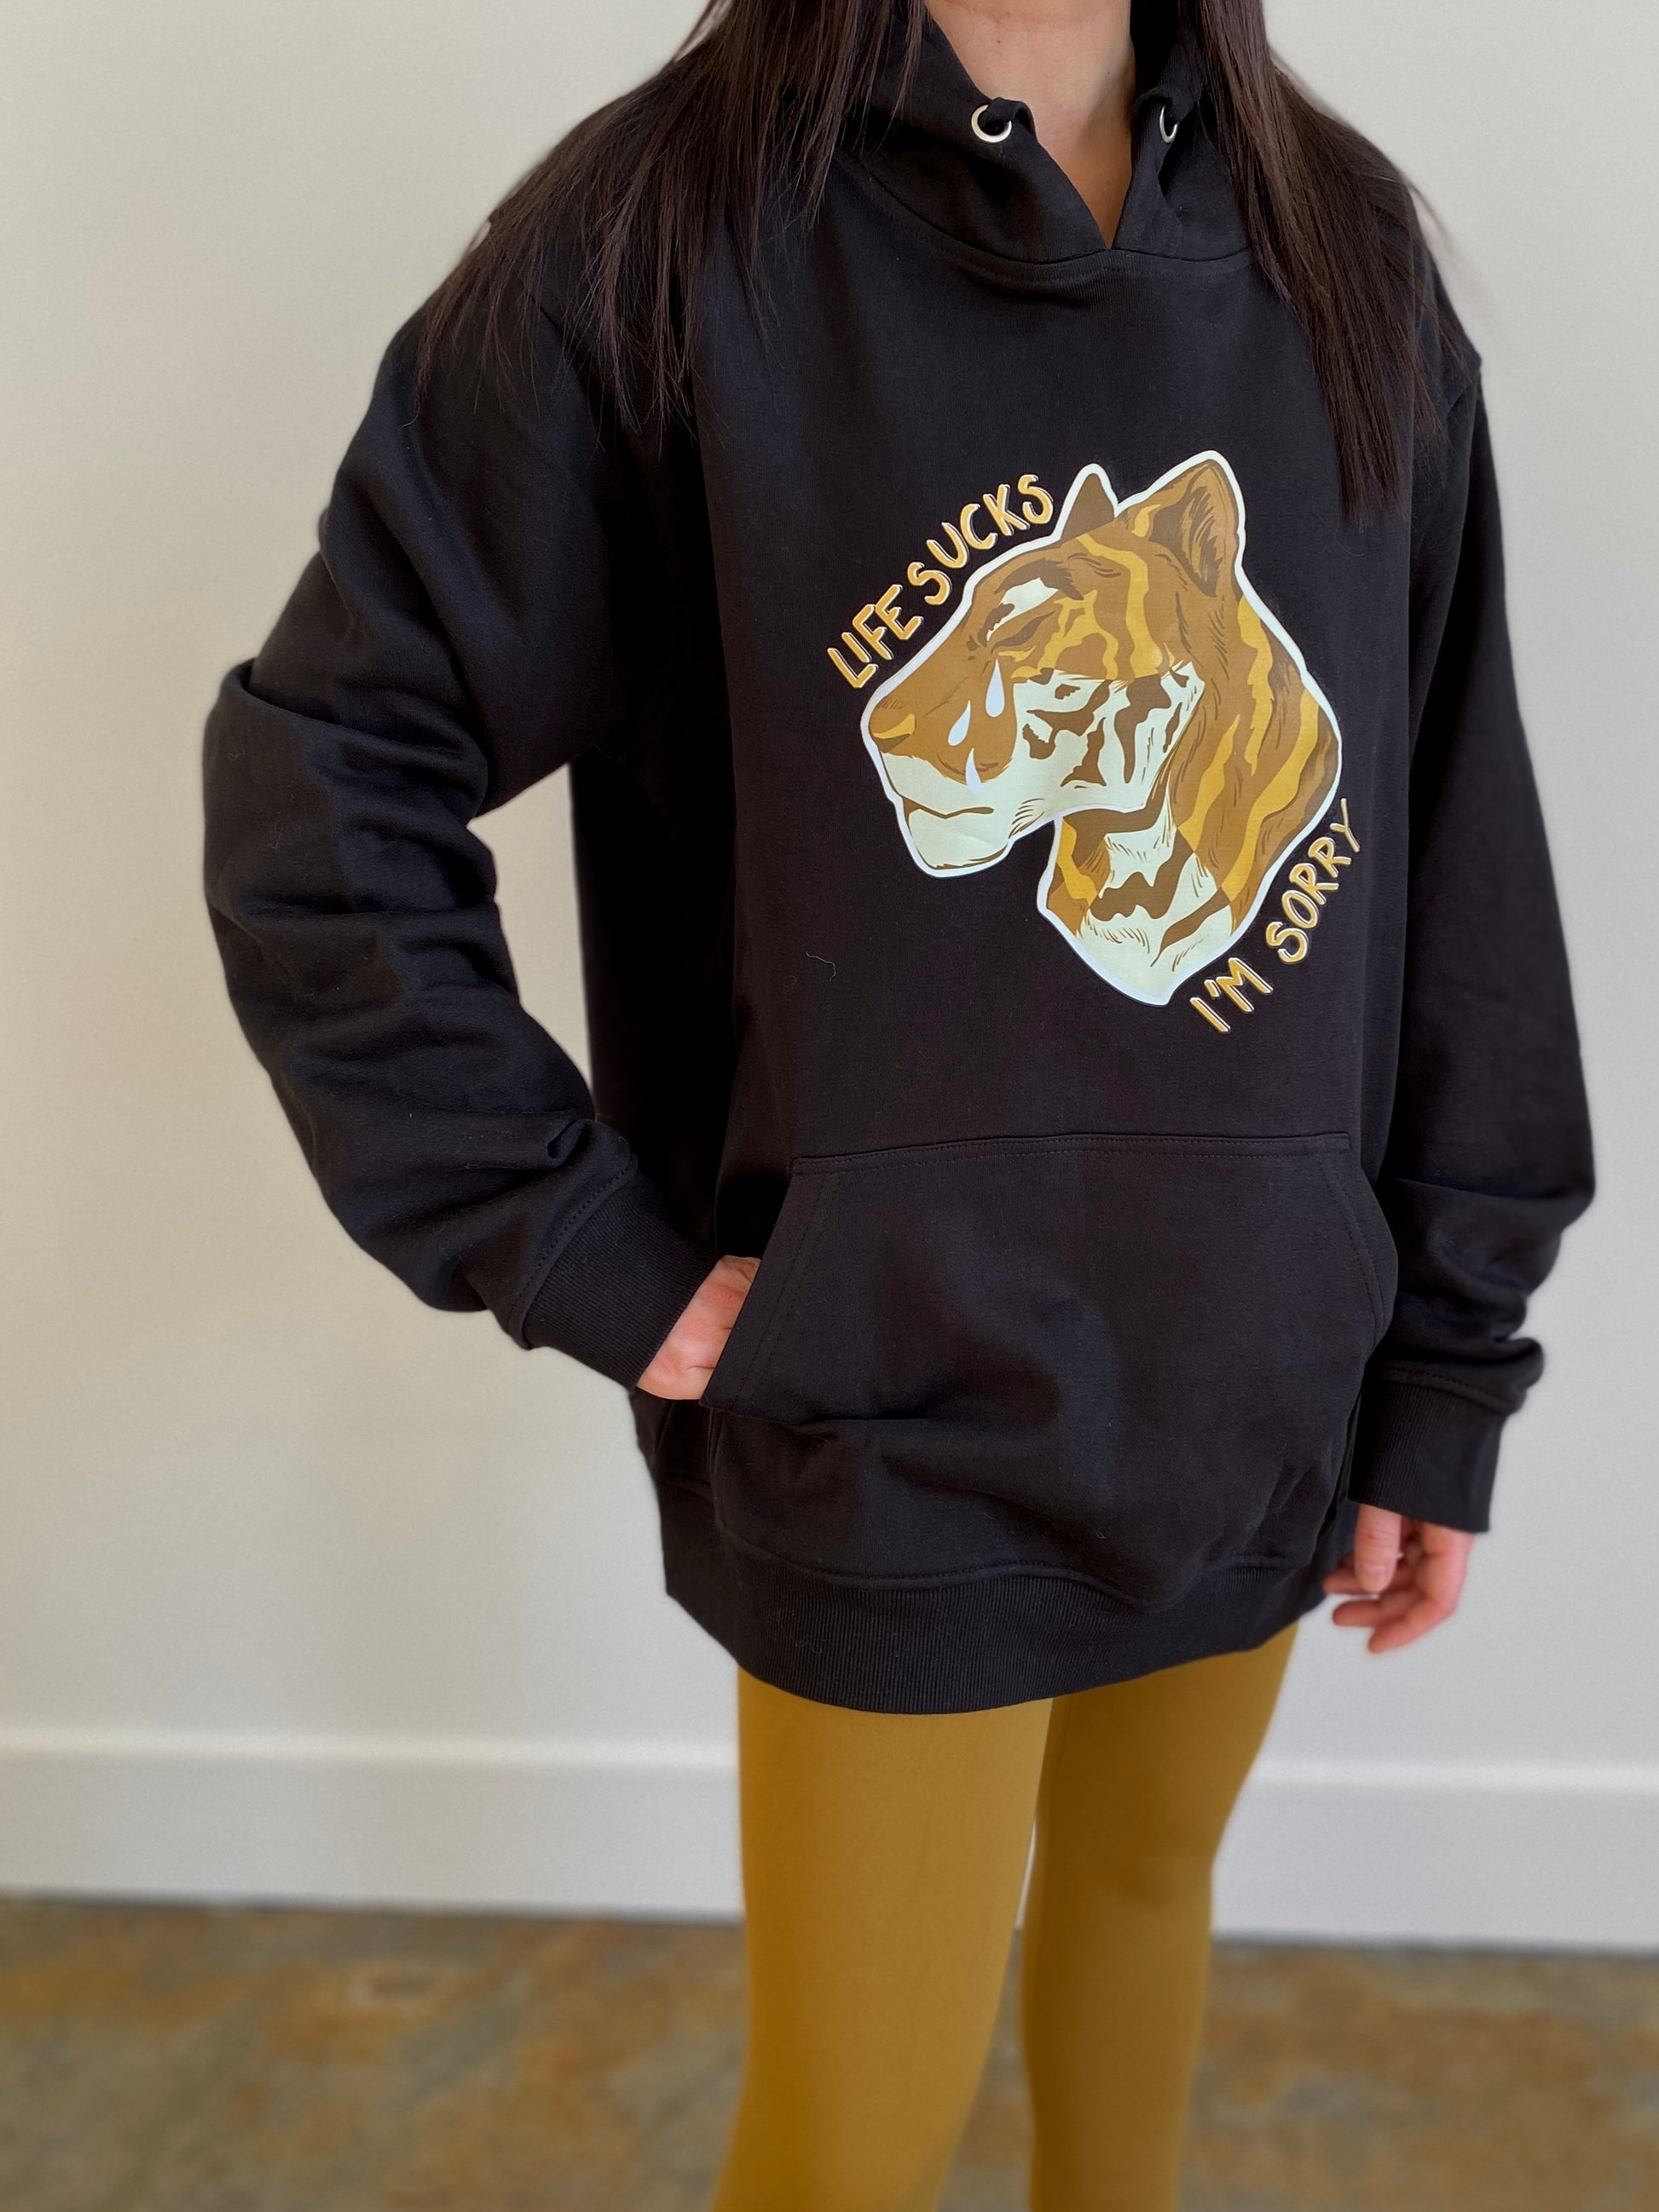 "Life sucks, I'm sorry" gold tiger design on black hoodie designed and illustrated by floral tattoo artist Lu Loram Martin, in Toronto, Canada.